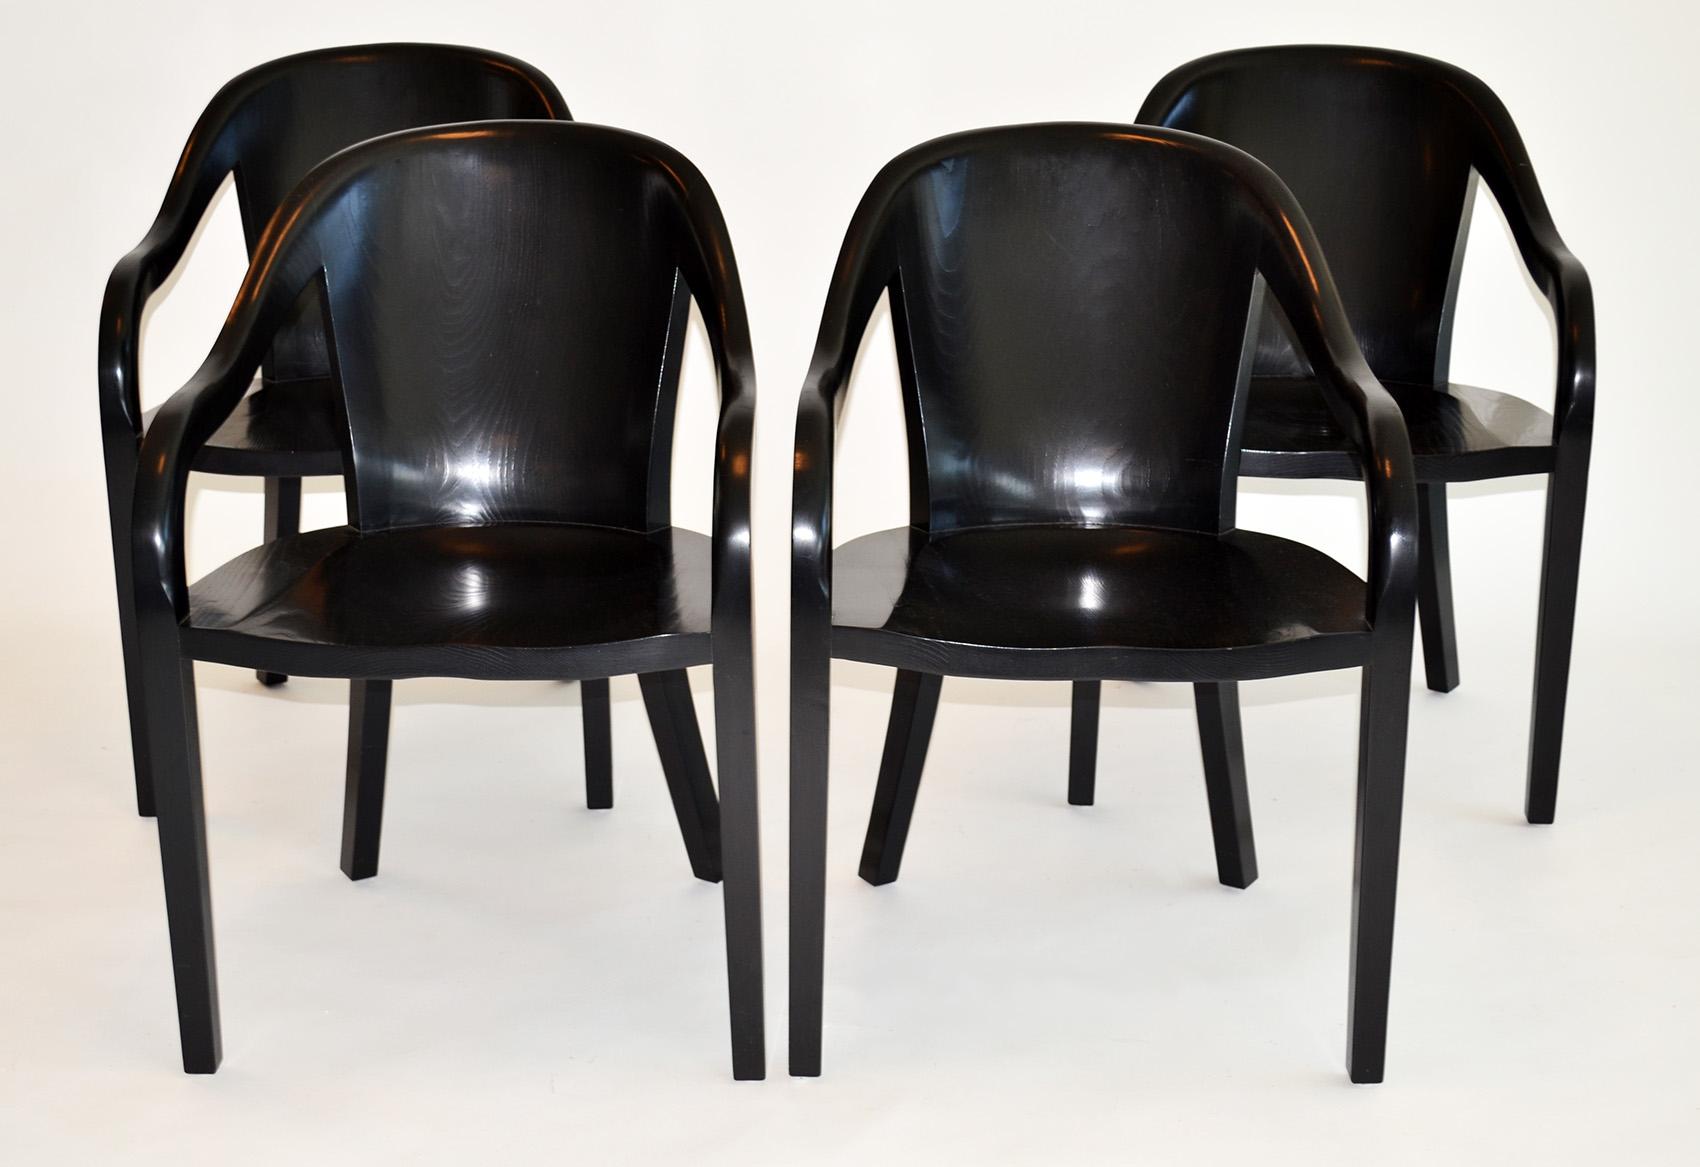 Set of four Ward Bennett University chairs for Brickell Associstes executed in black Ash. Bennett produced these chairs through Brickell Associates in the 1970s.
Designed in 1971 for the Lyndon Johnson Presidential Library, The outwardly simple